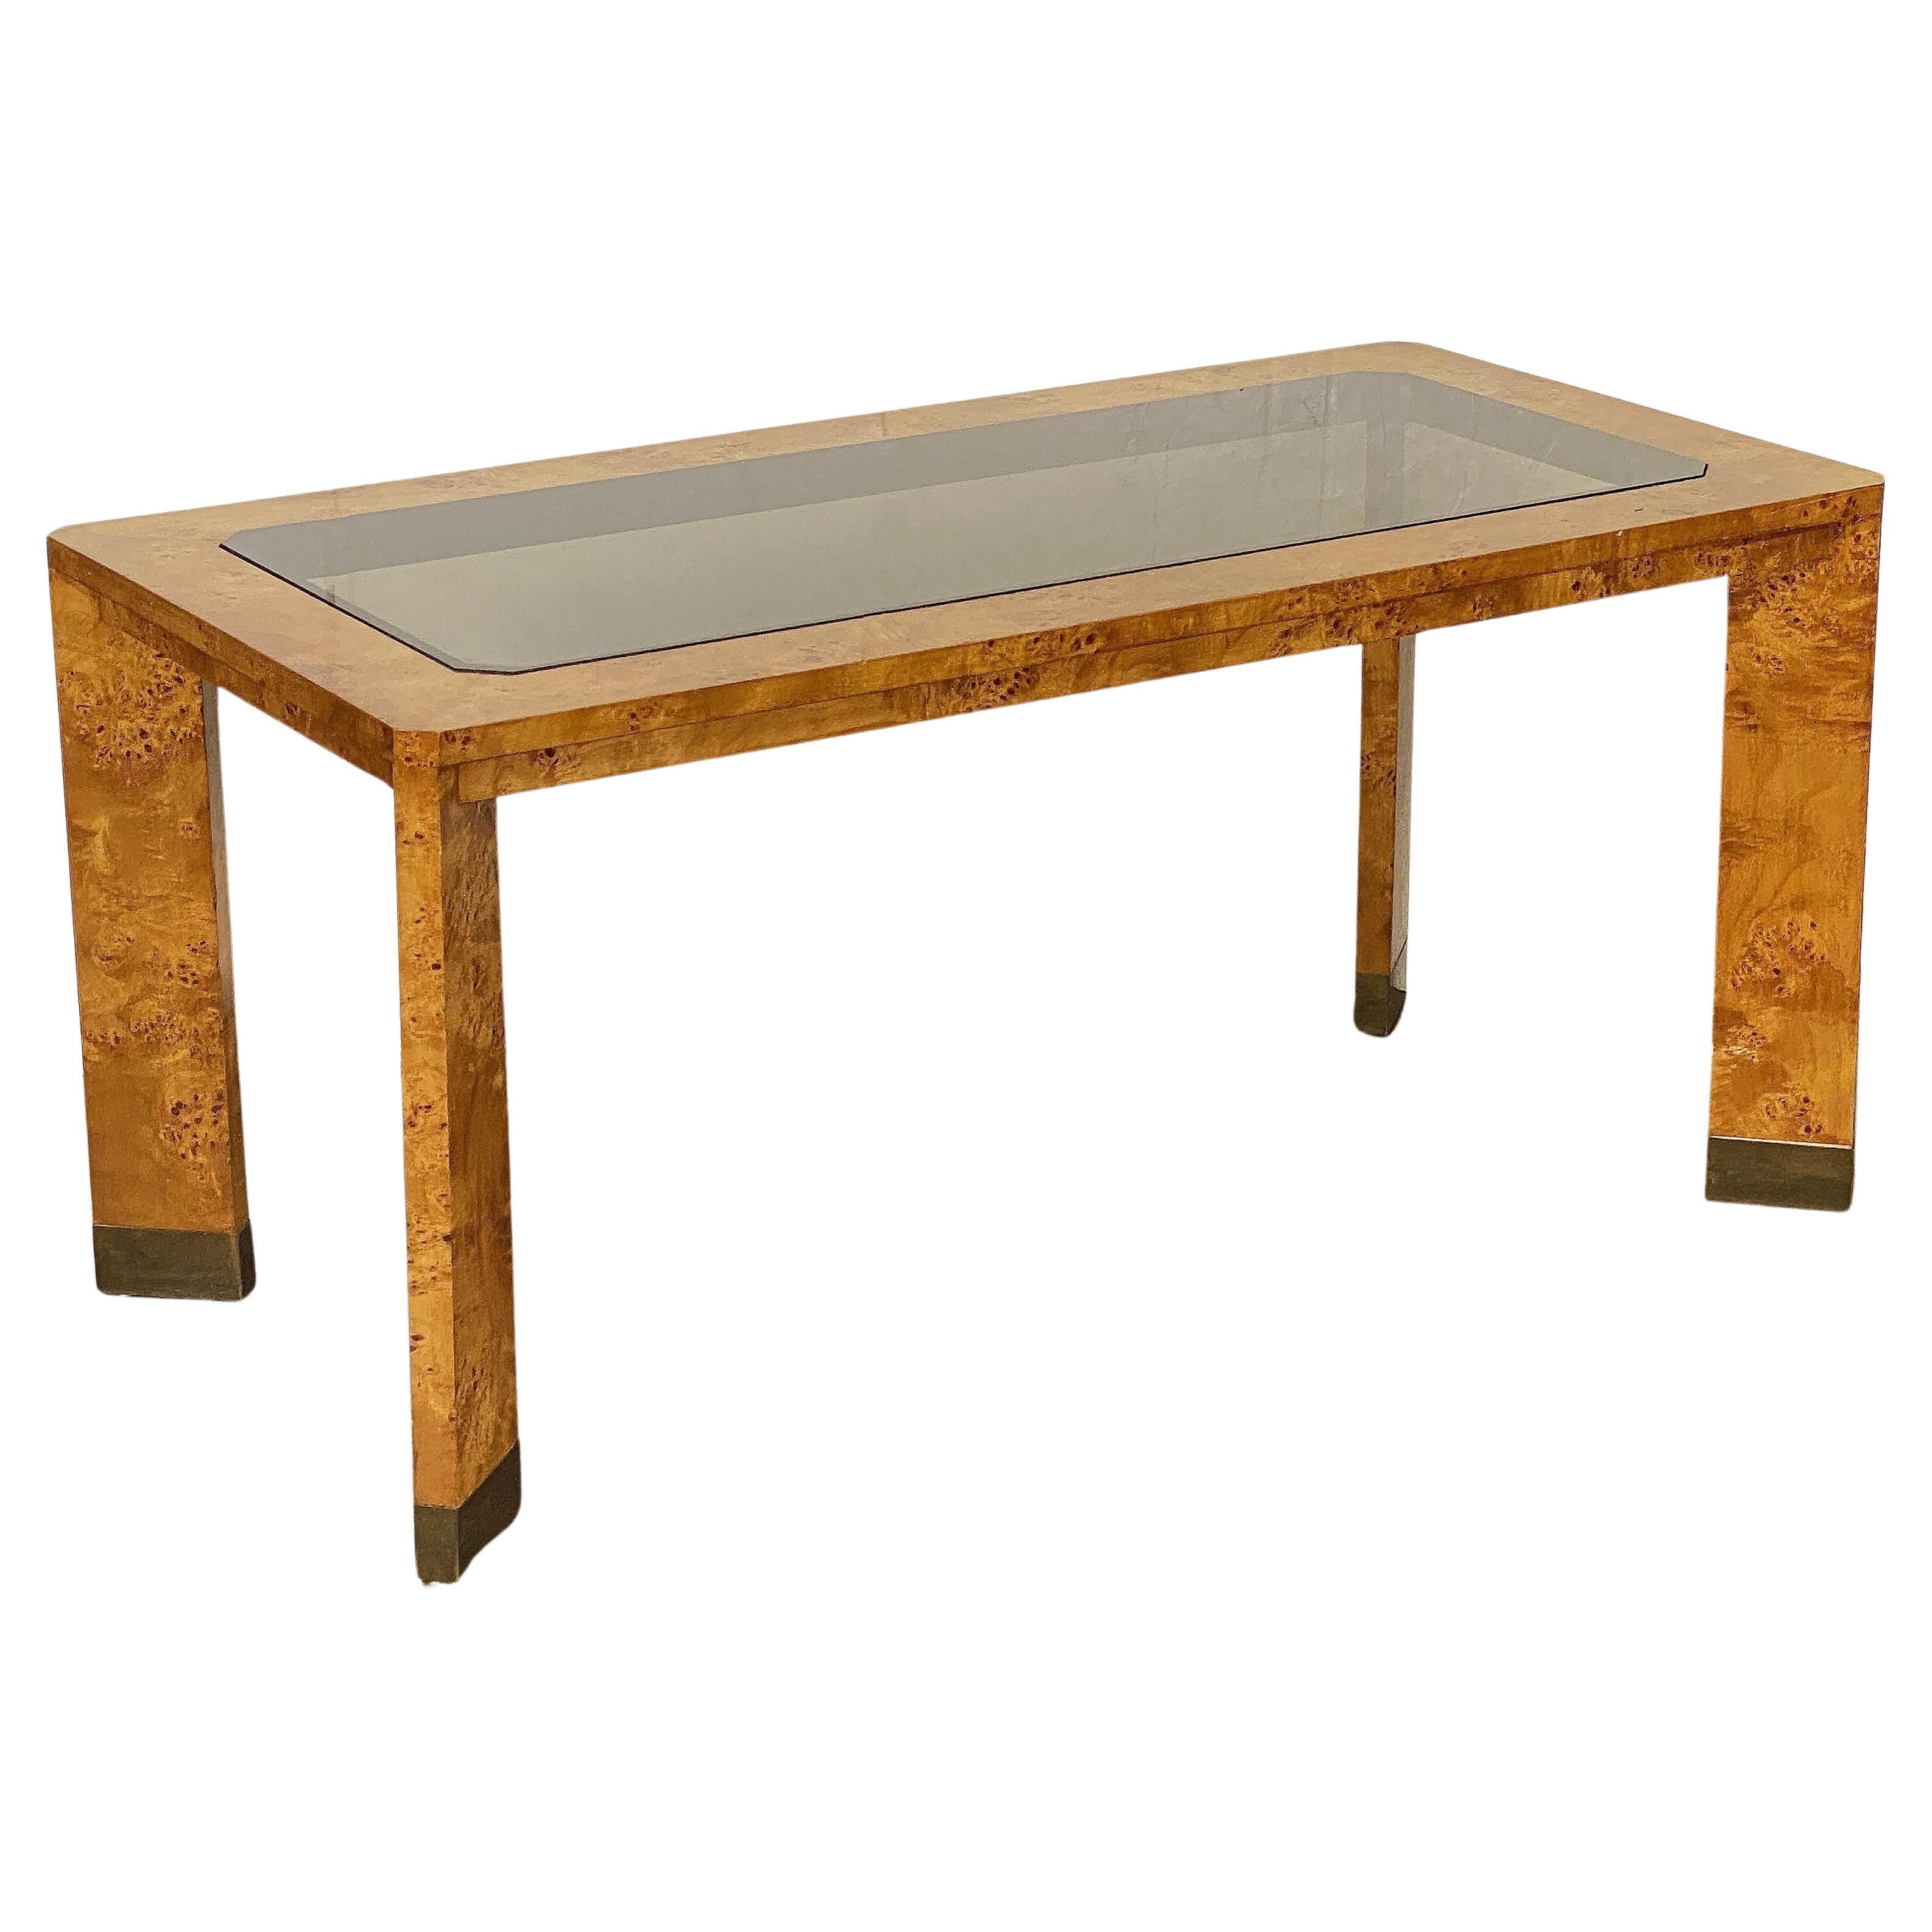 French Modern Rectangular Dining Table of Burled Elm with Smoked Glass Top For Sale